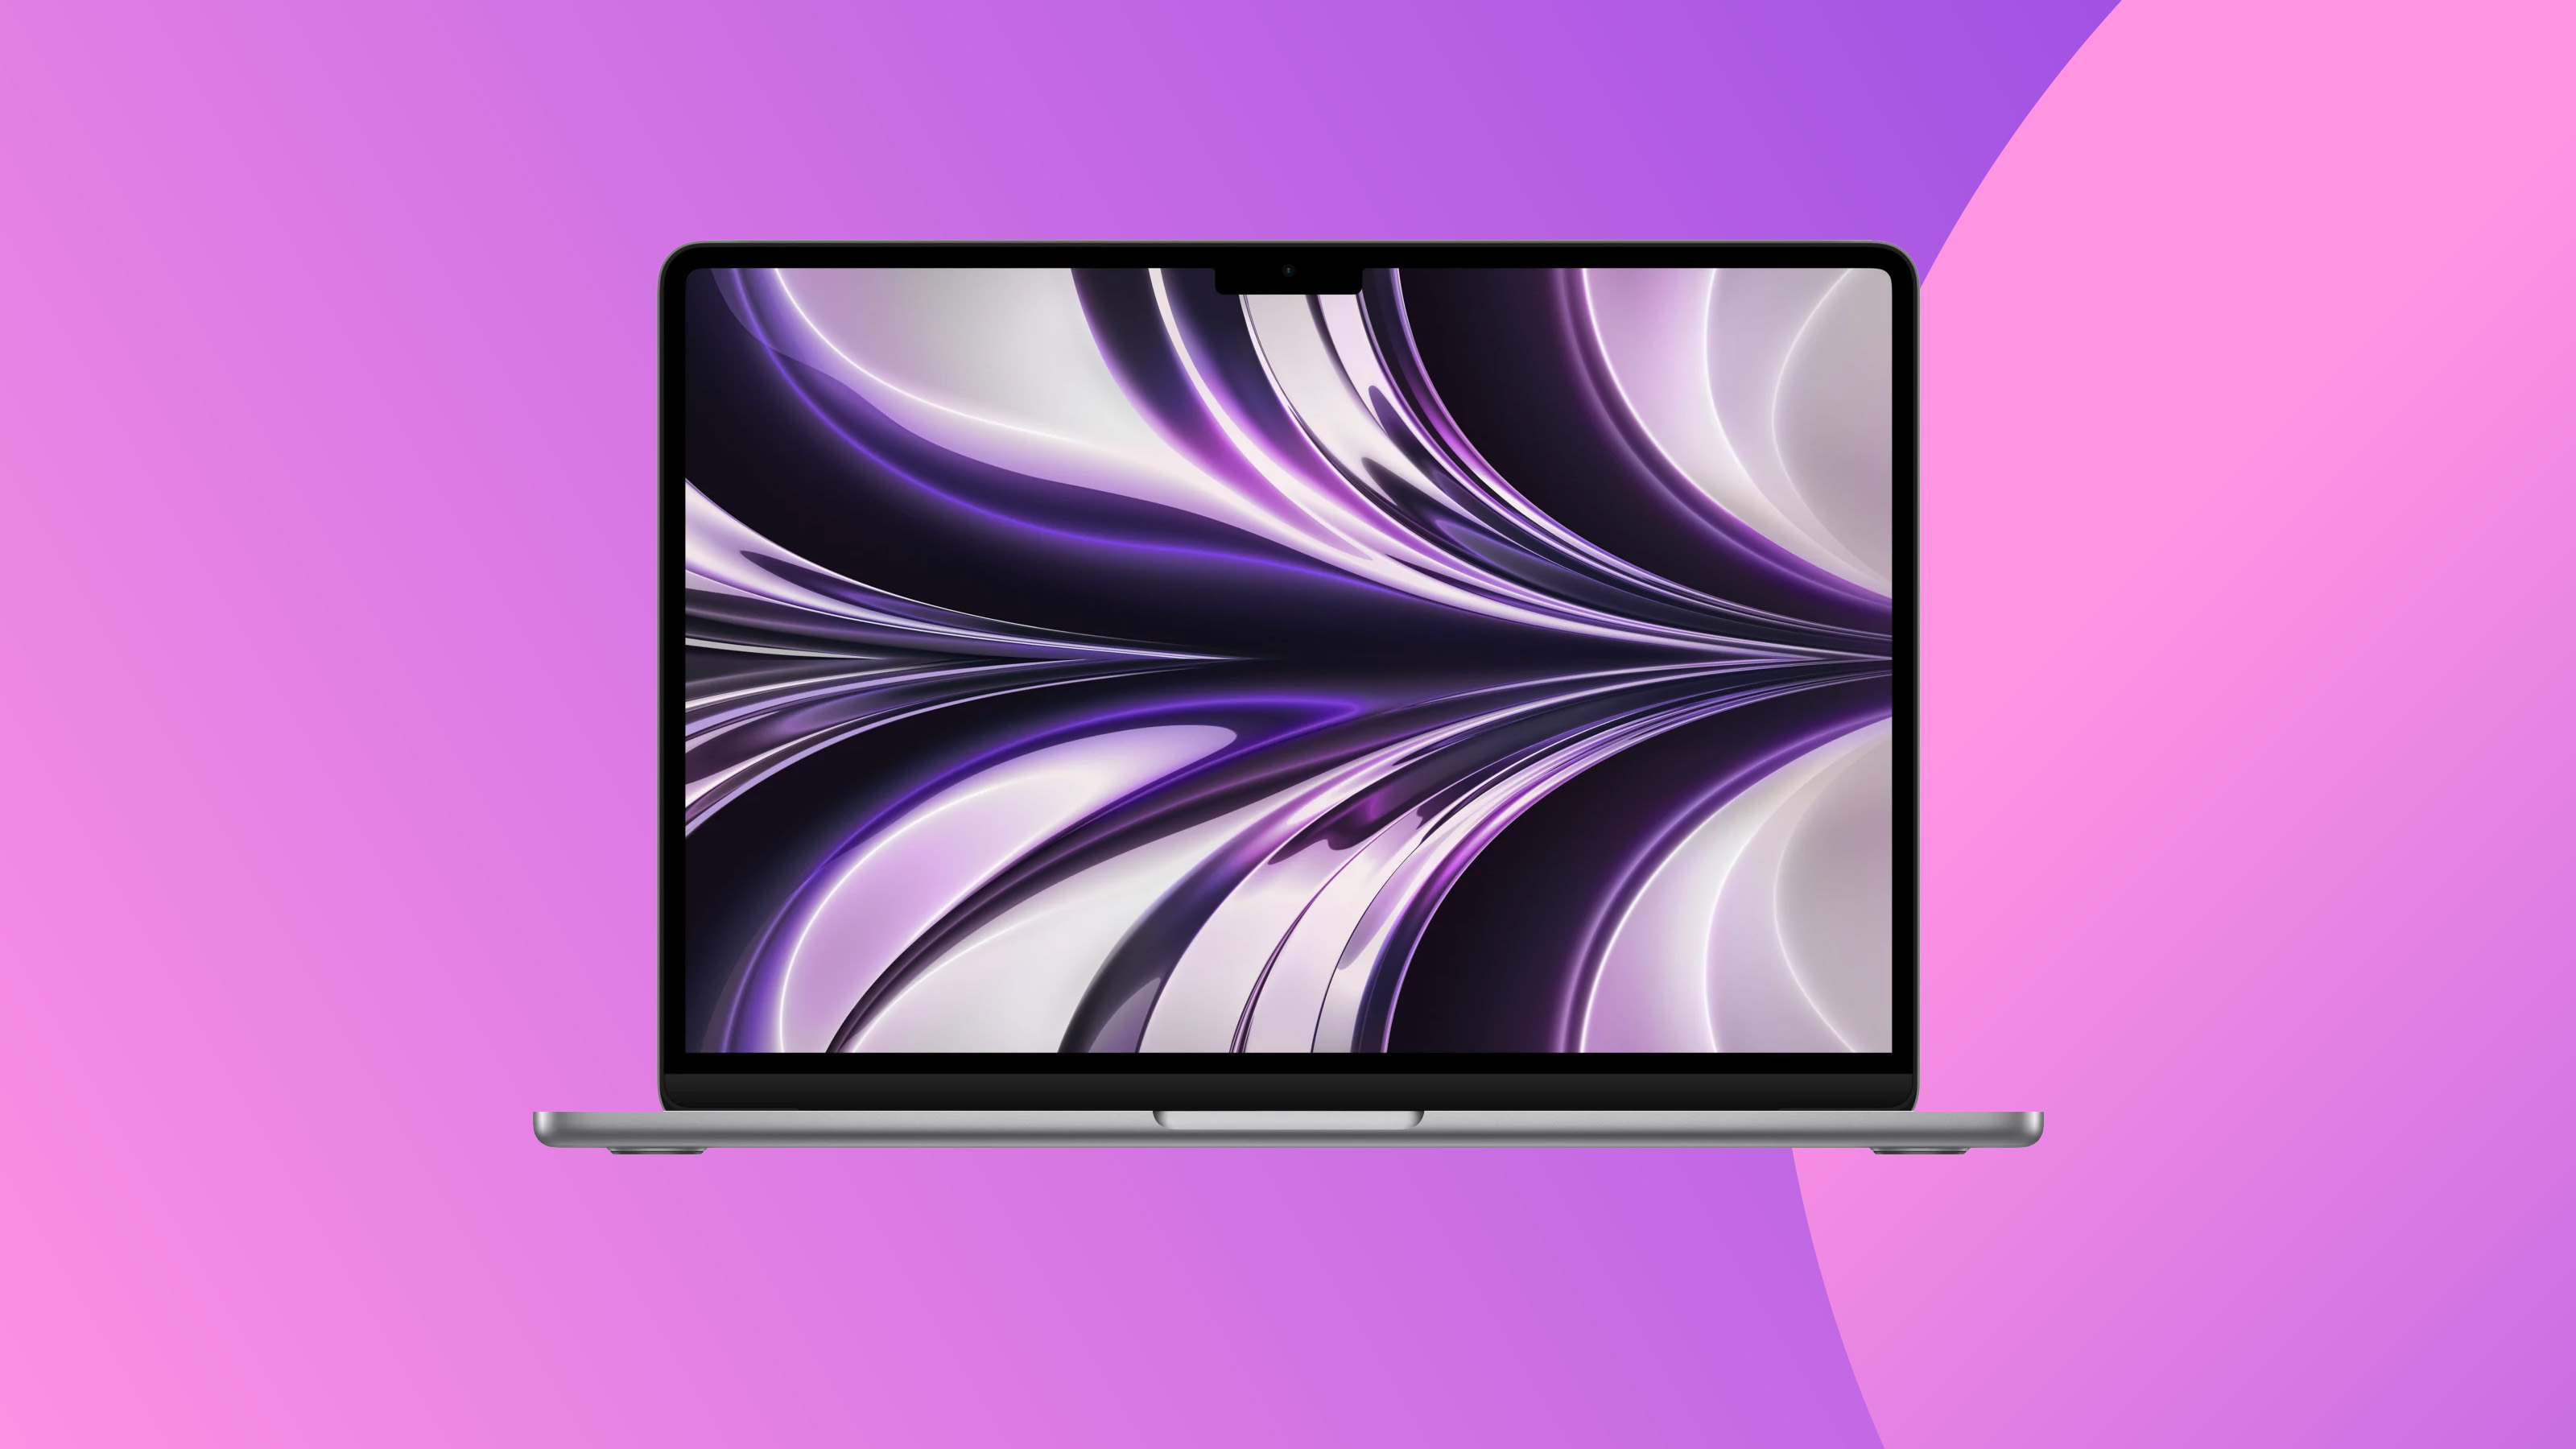 A product shot of the MacBook Air on a colourful background